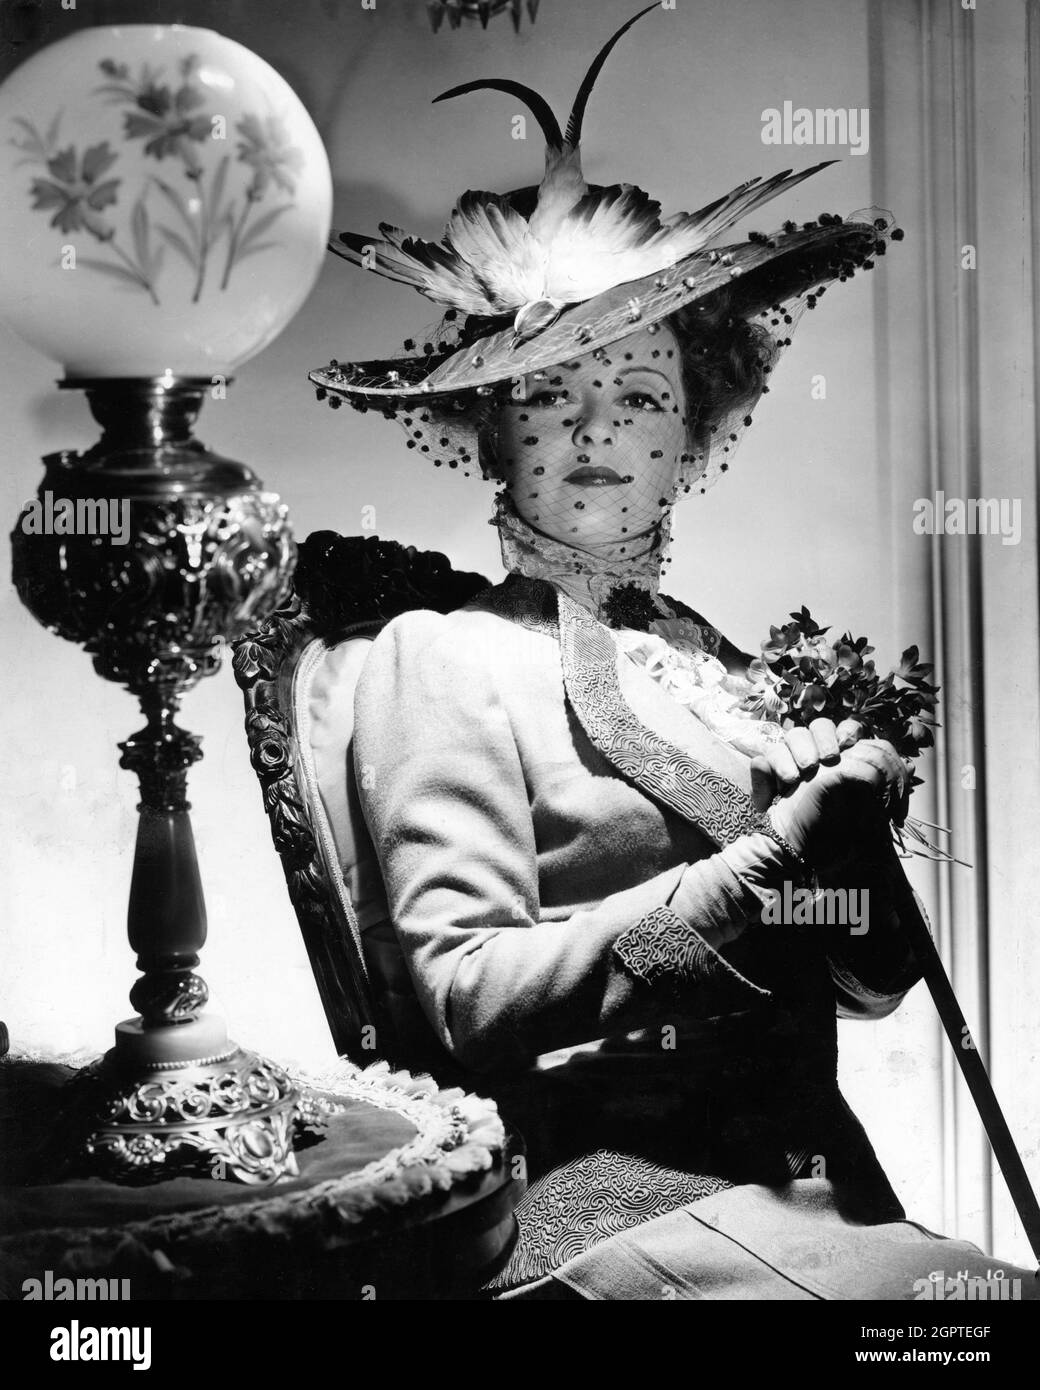 BETTE DAVIS Portrait as Regina Giddens by GEORGE HURRELL in THE LITTLE FOXES 1941 director WILLIAM WYLER play / screenplay Lillian Hellman costume design Orry-Kelly The Samuel Goldwyn Company / RKO Radio Pictures Stock Photo